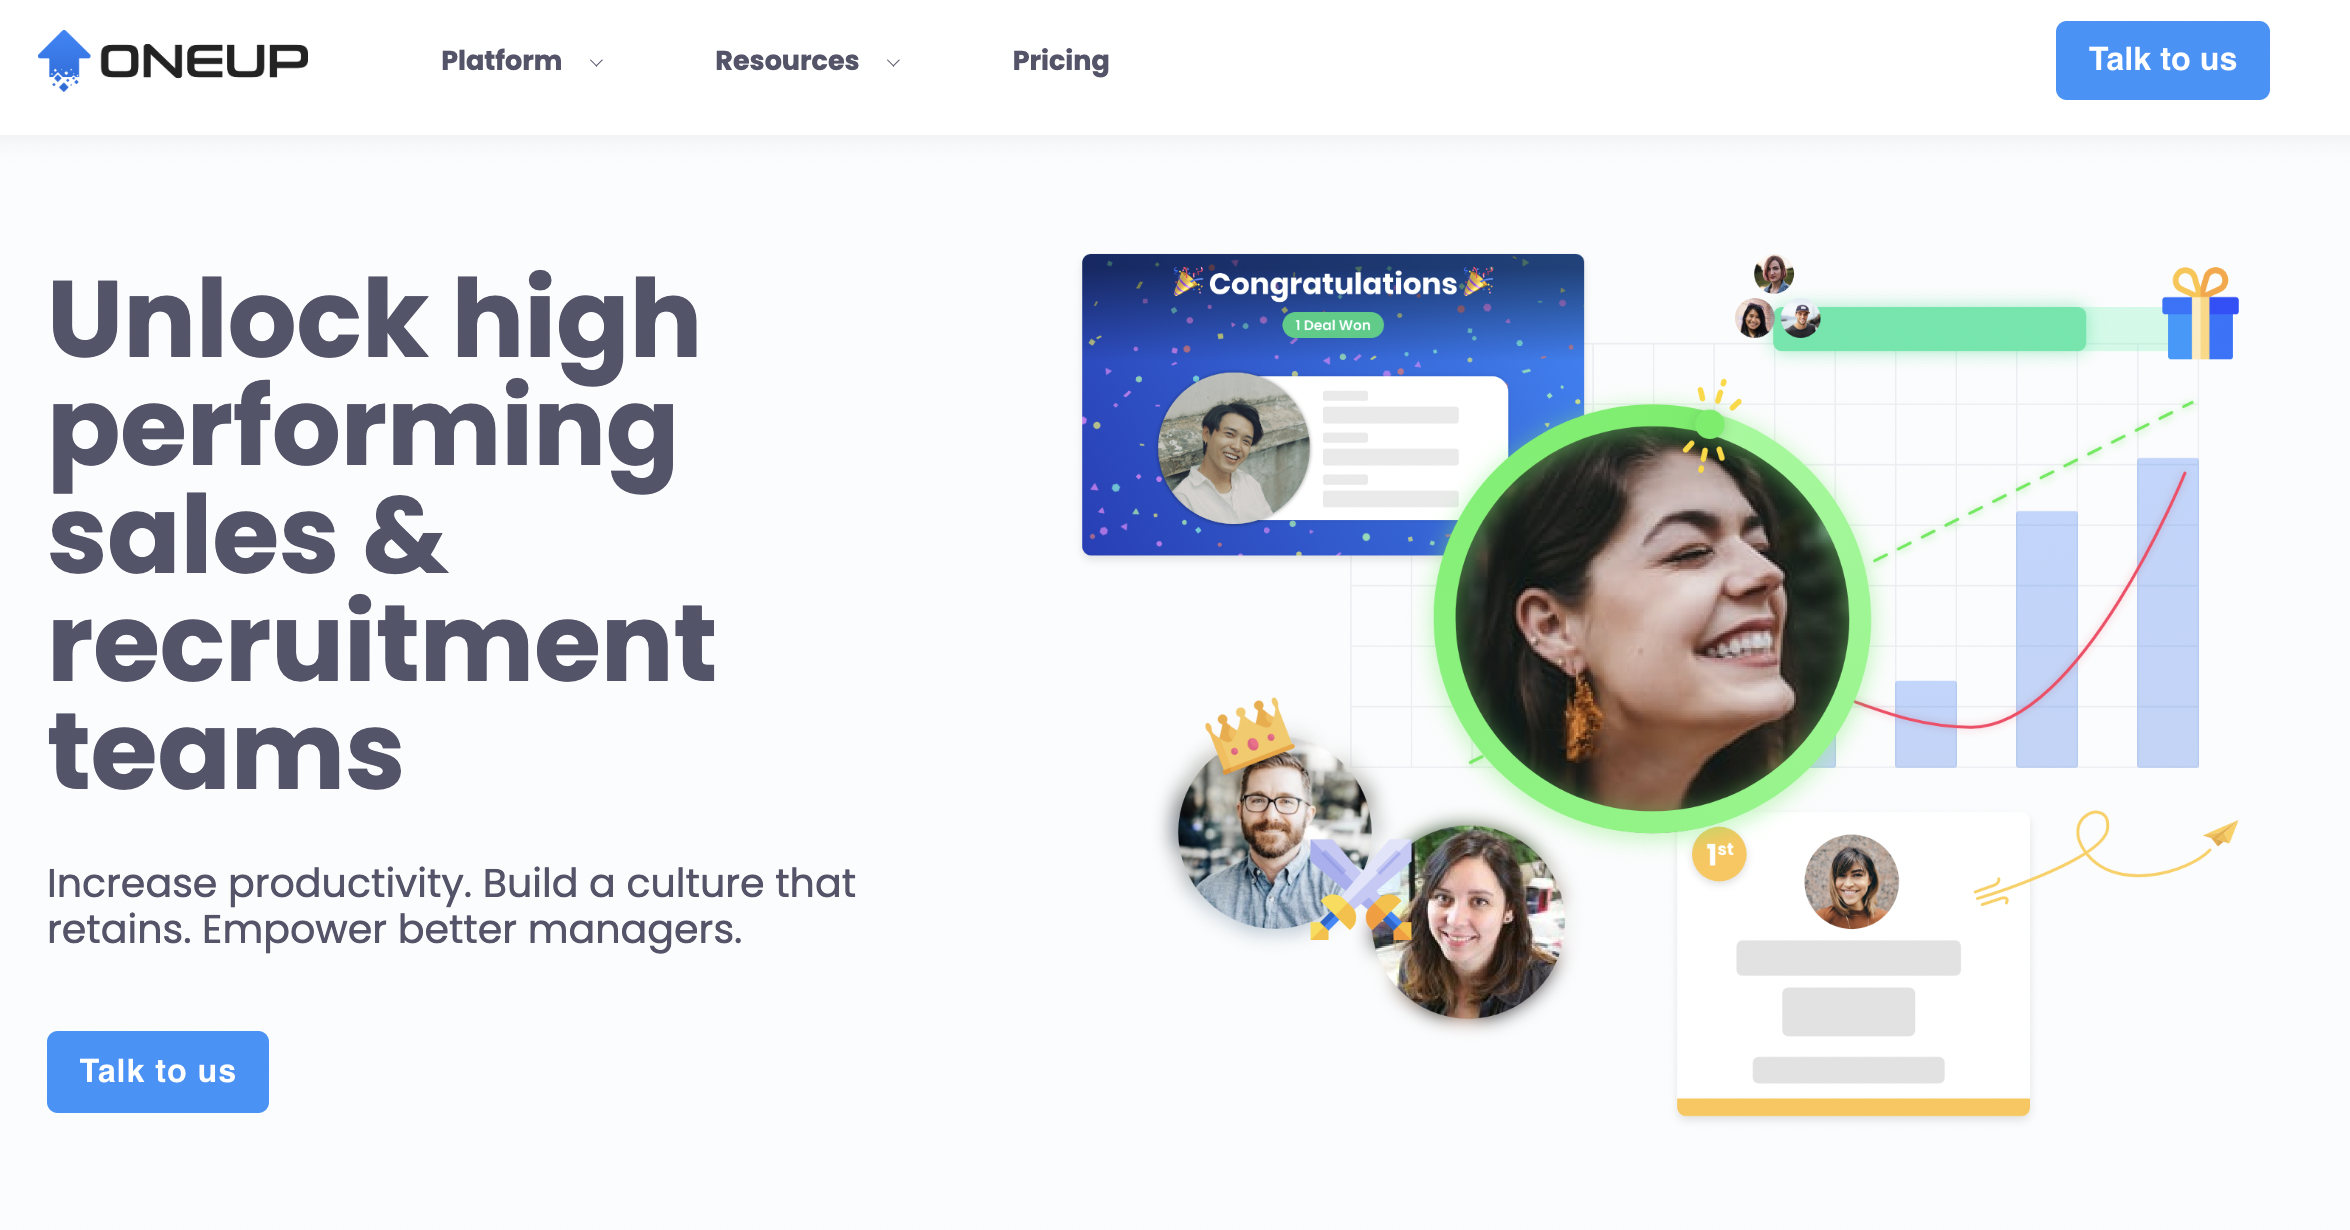 Spinify Blog  Gamification Leaderboards for Recruitment